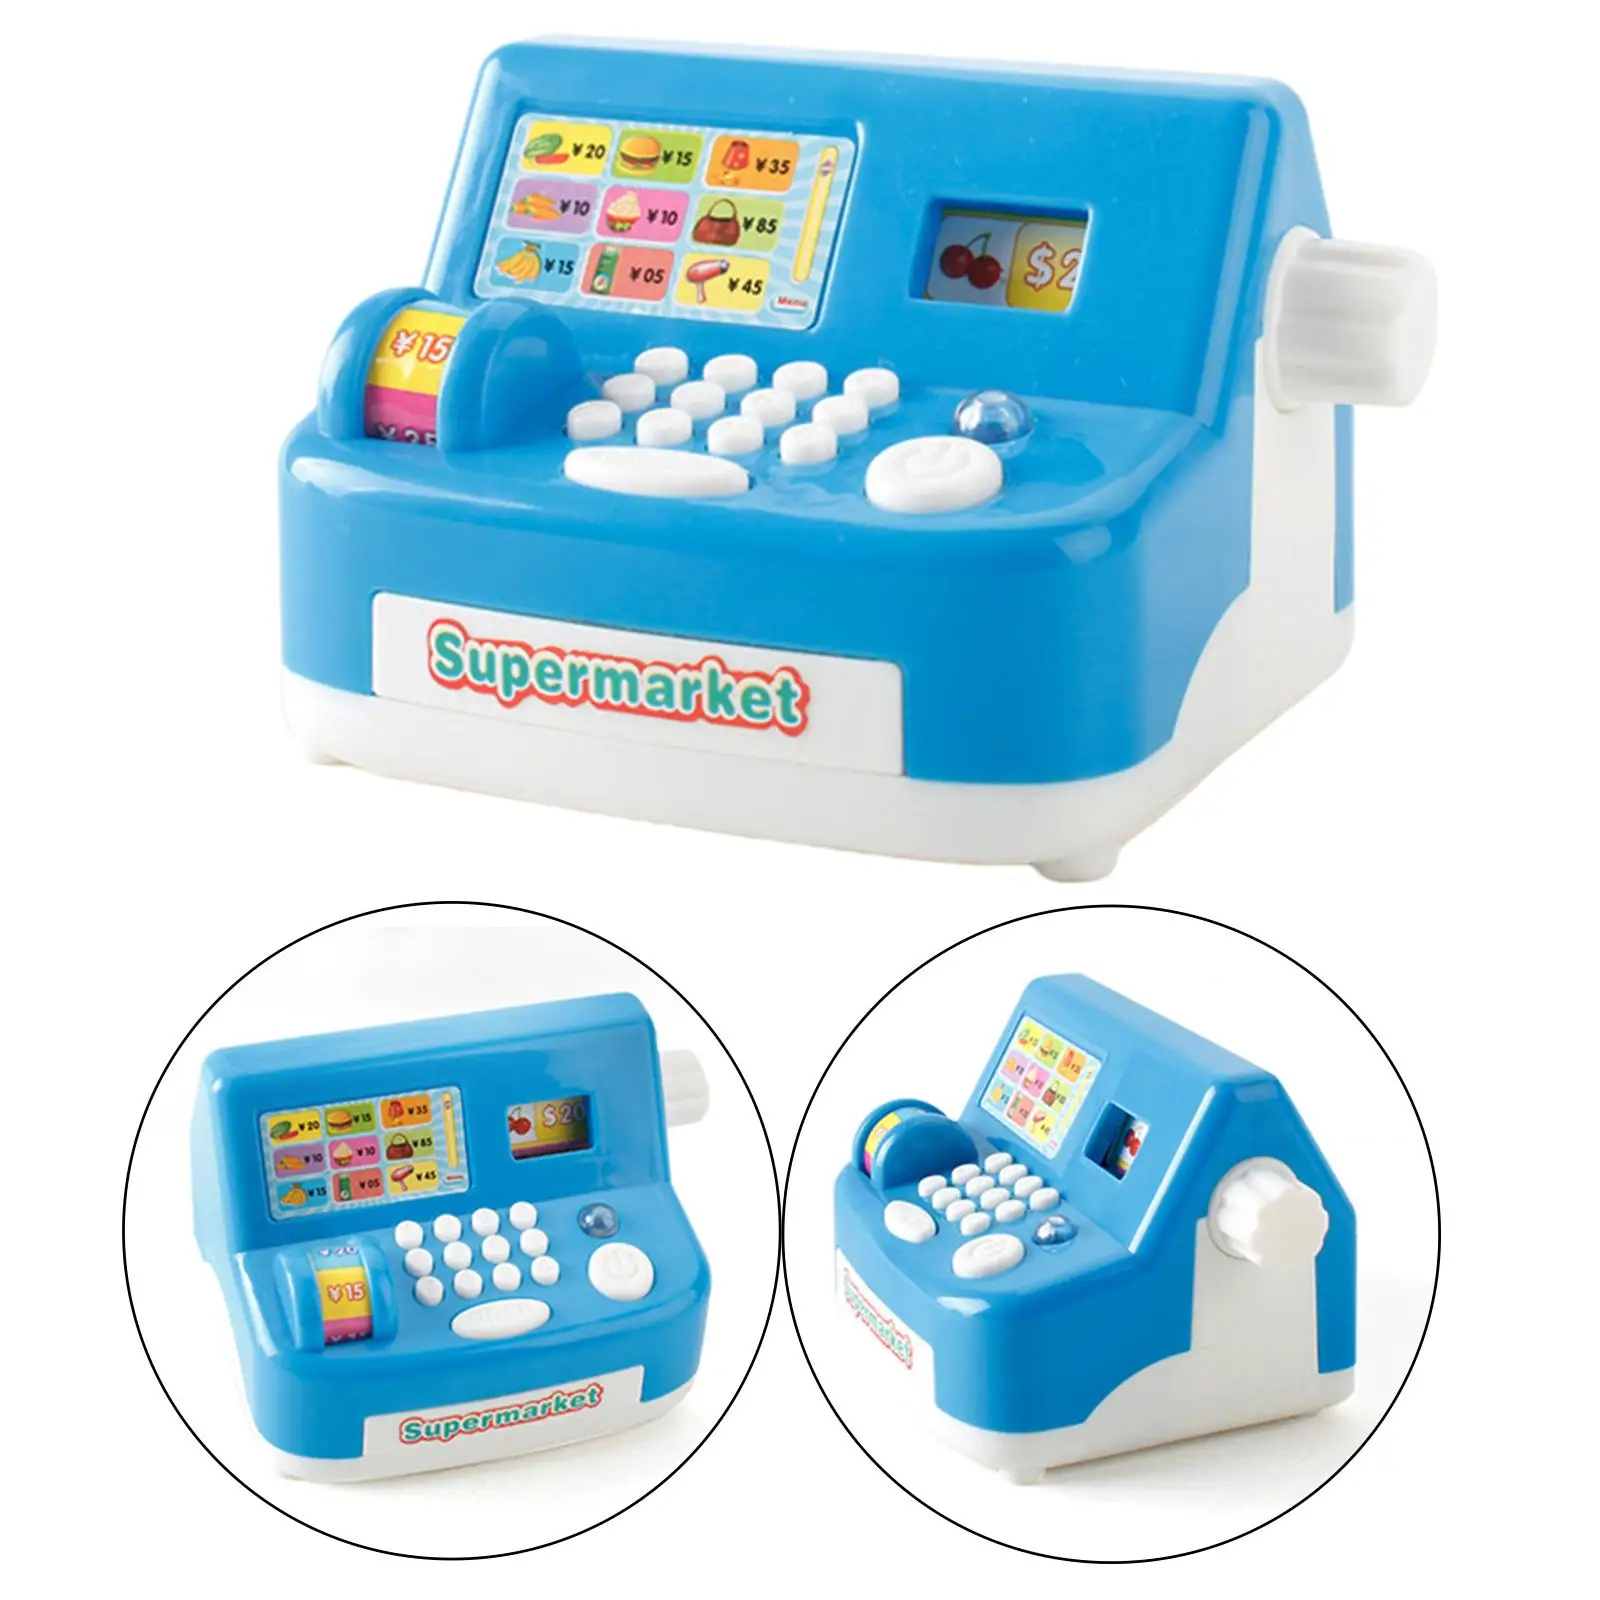 Simulation Cash Register Battery Operated Pretend Play Shopping Cashier for Preschool Kids Age 3 4 5 6 7+ Learning Gift